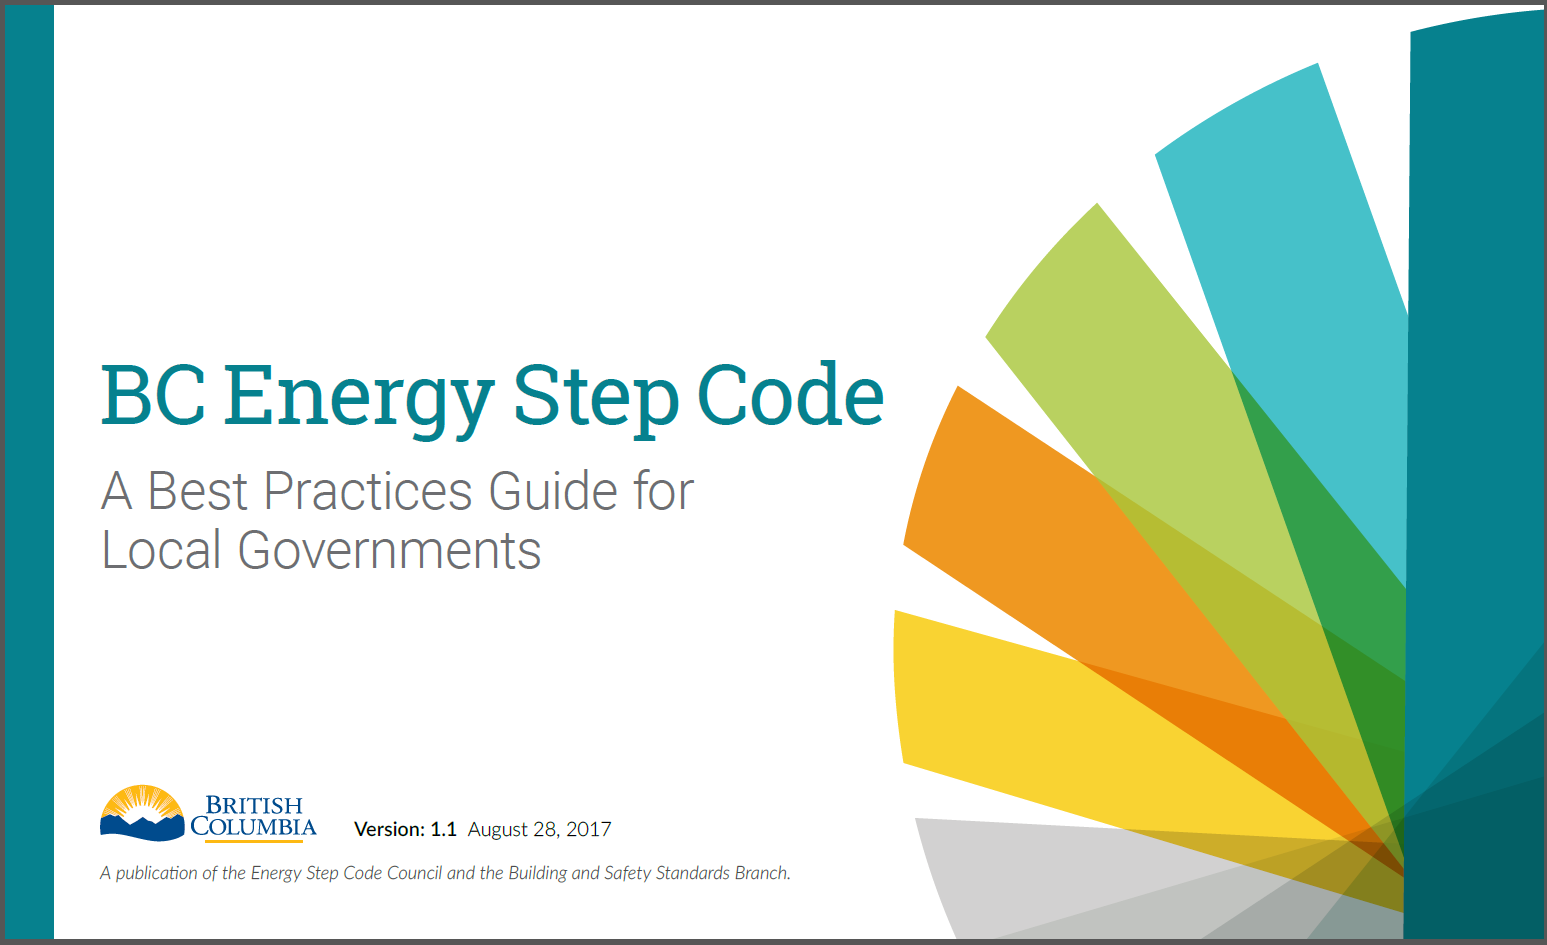 Image of the cover of the BC Energy Step Code Best Practices Guide for Local Governments